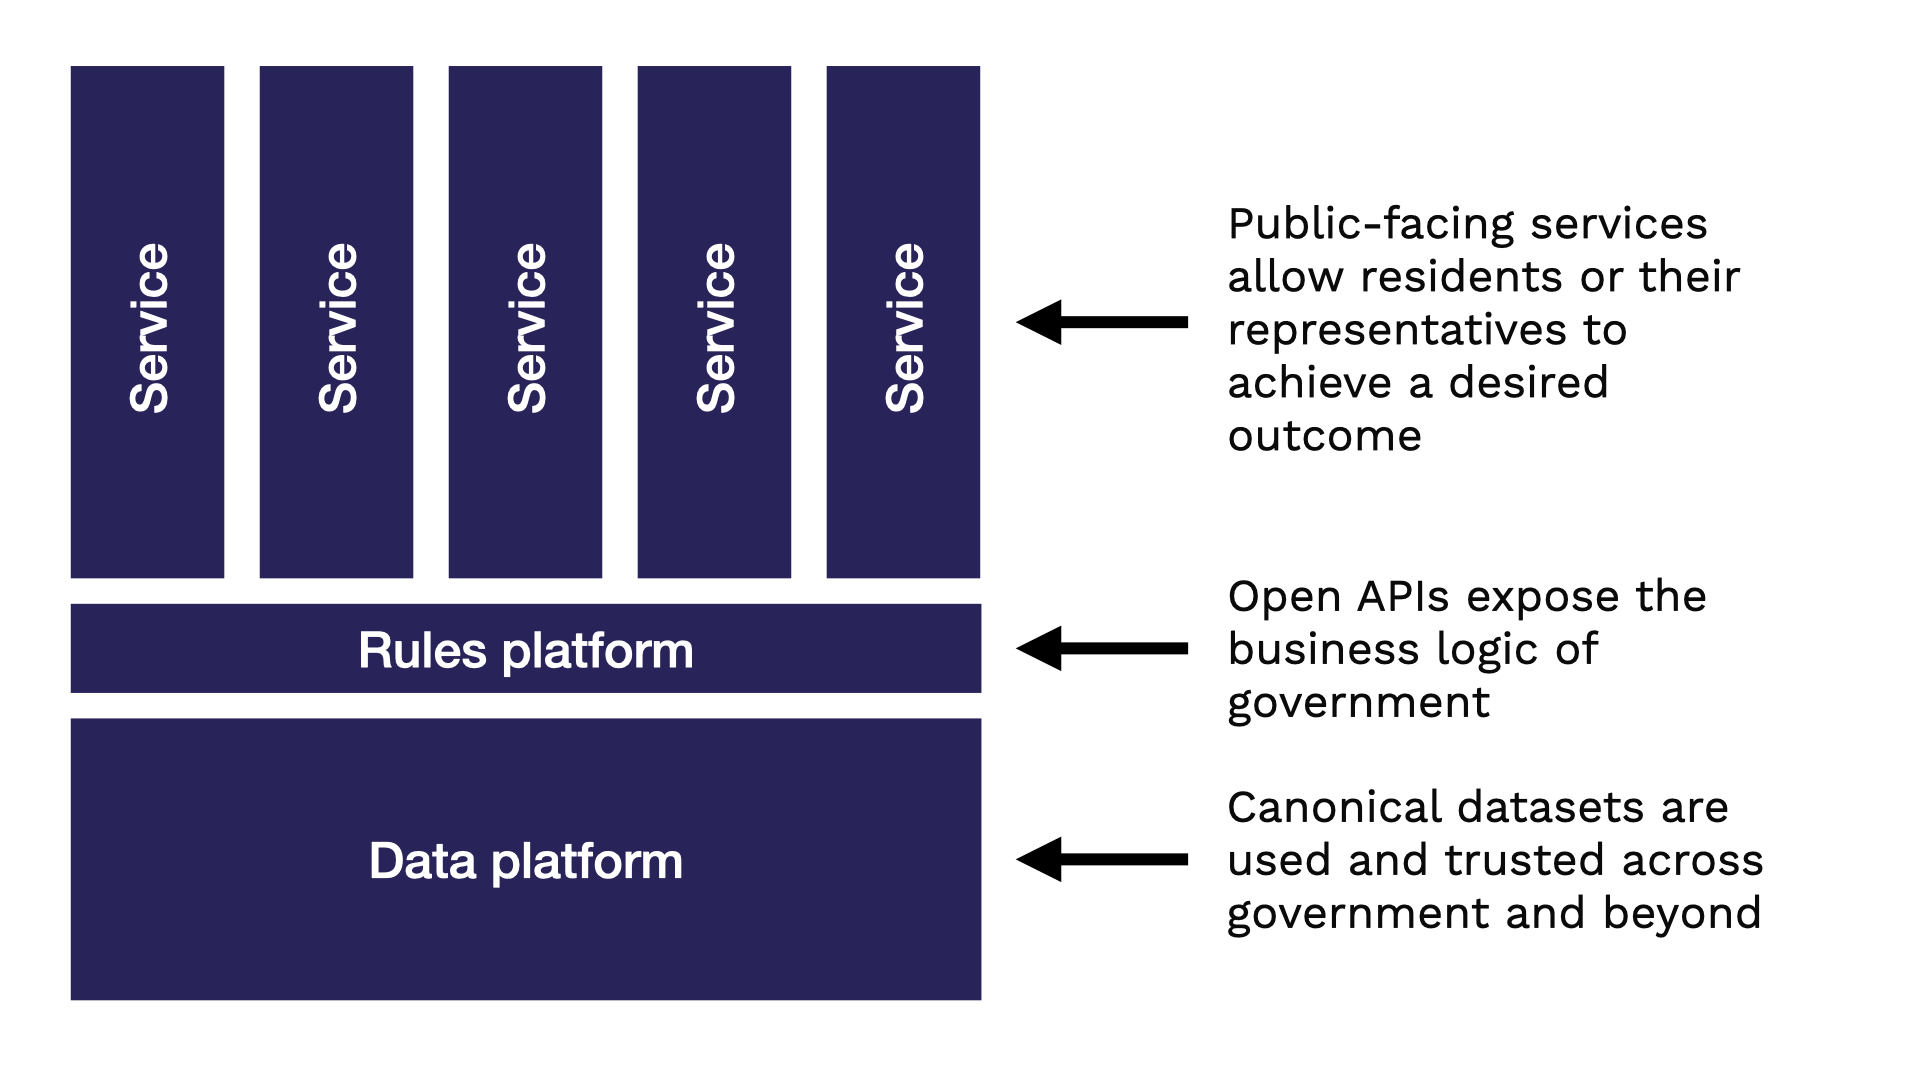 Stack diagram showing services built on top of a rules platform and a data platform. Public-facing services allow residents or their representatives to achieve a desired outcome. Open APIs expose the business logic of government. Canonical datasets are used and trusted across government and beyond